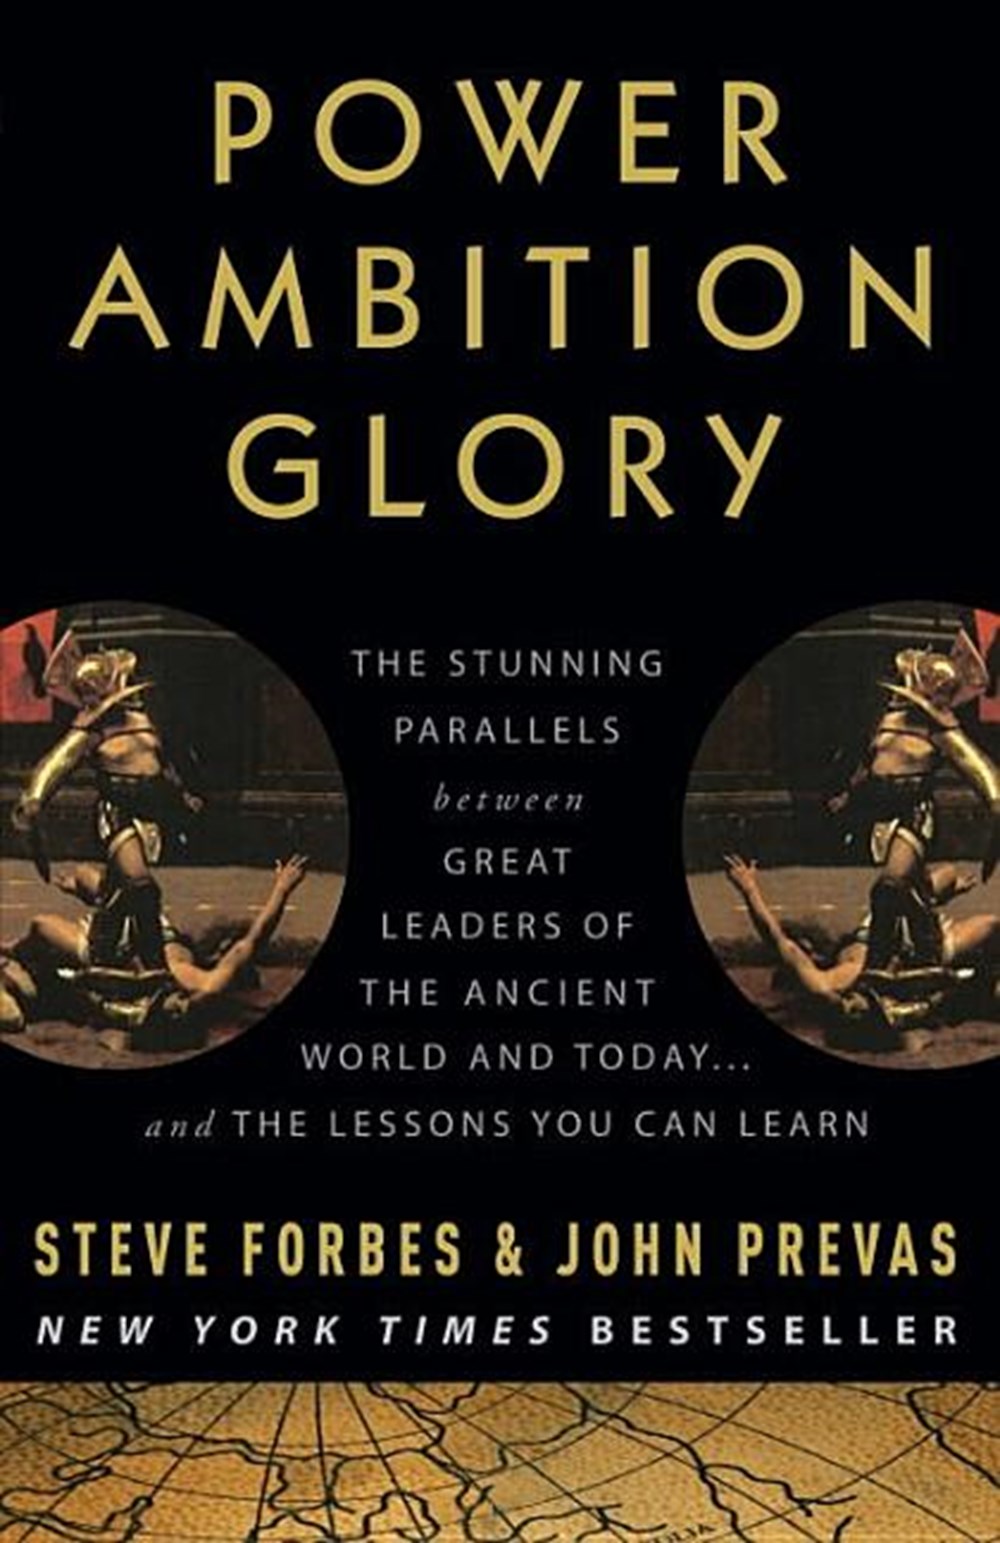 Power Ambition Glory: The Stunning Parallels Between Great Leaders of the Ancient World and Today . 